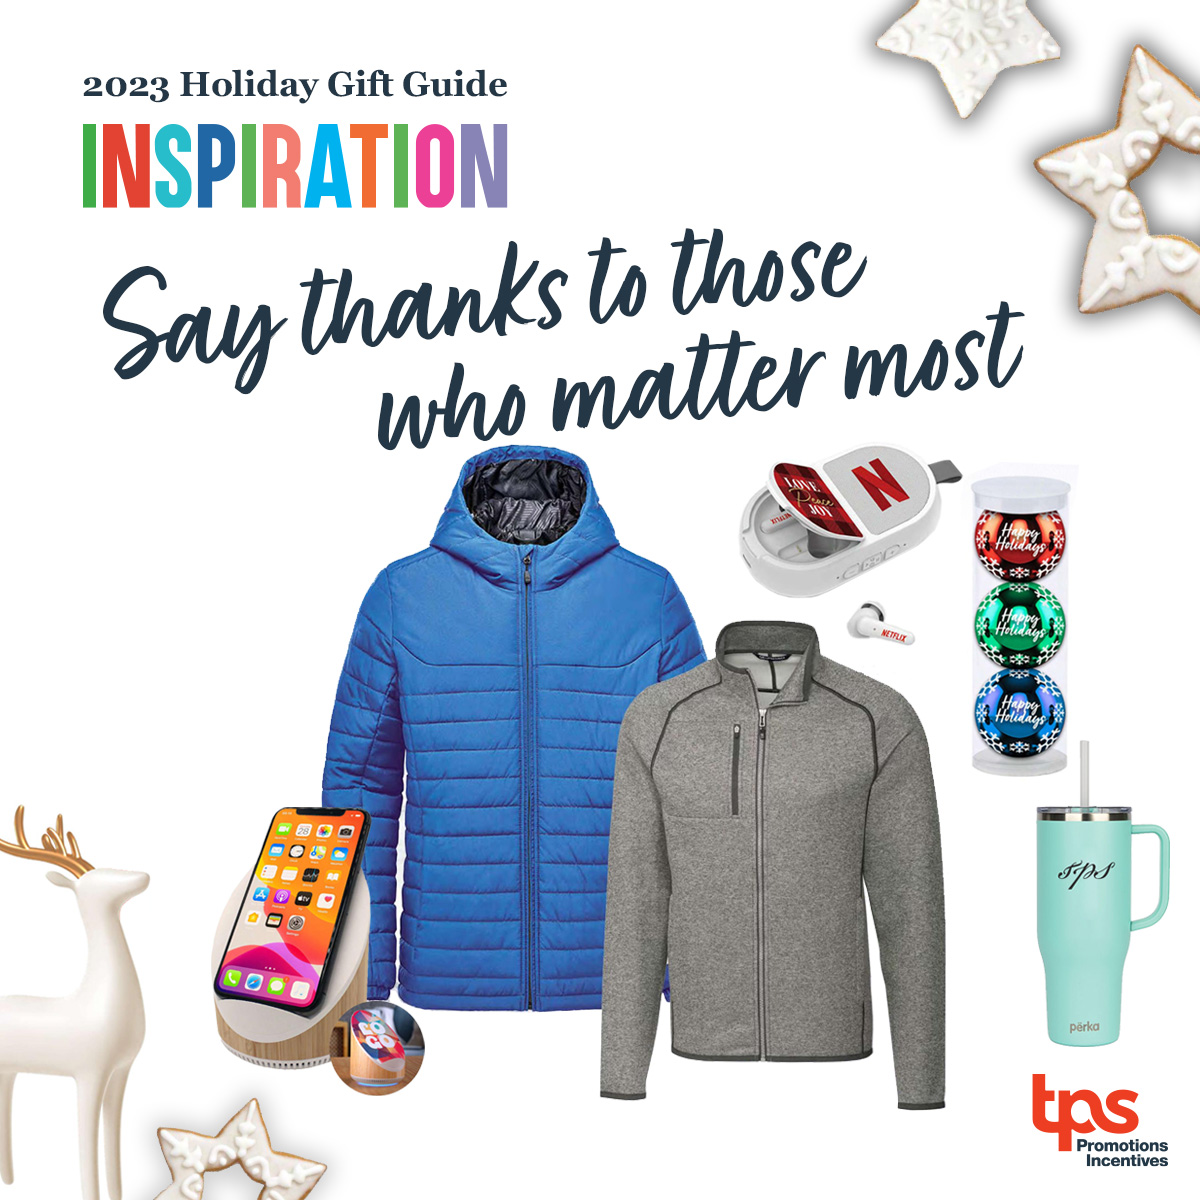 Explore the 2023 Holiday Gift Guide tpscan.com/tps-gift-guide… From thoughtful gifts for your hardworking team to gifts of appreciation for your valued partners, it's time to show appreciation to those who make it all possible. #holidaygifting #holidaygifts #employeeappreciation